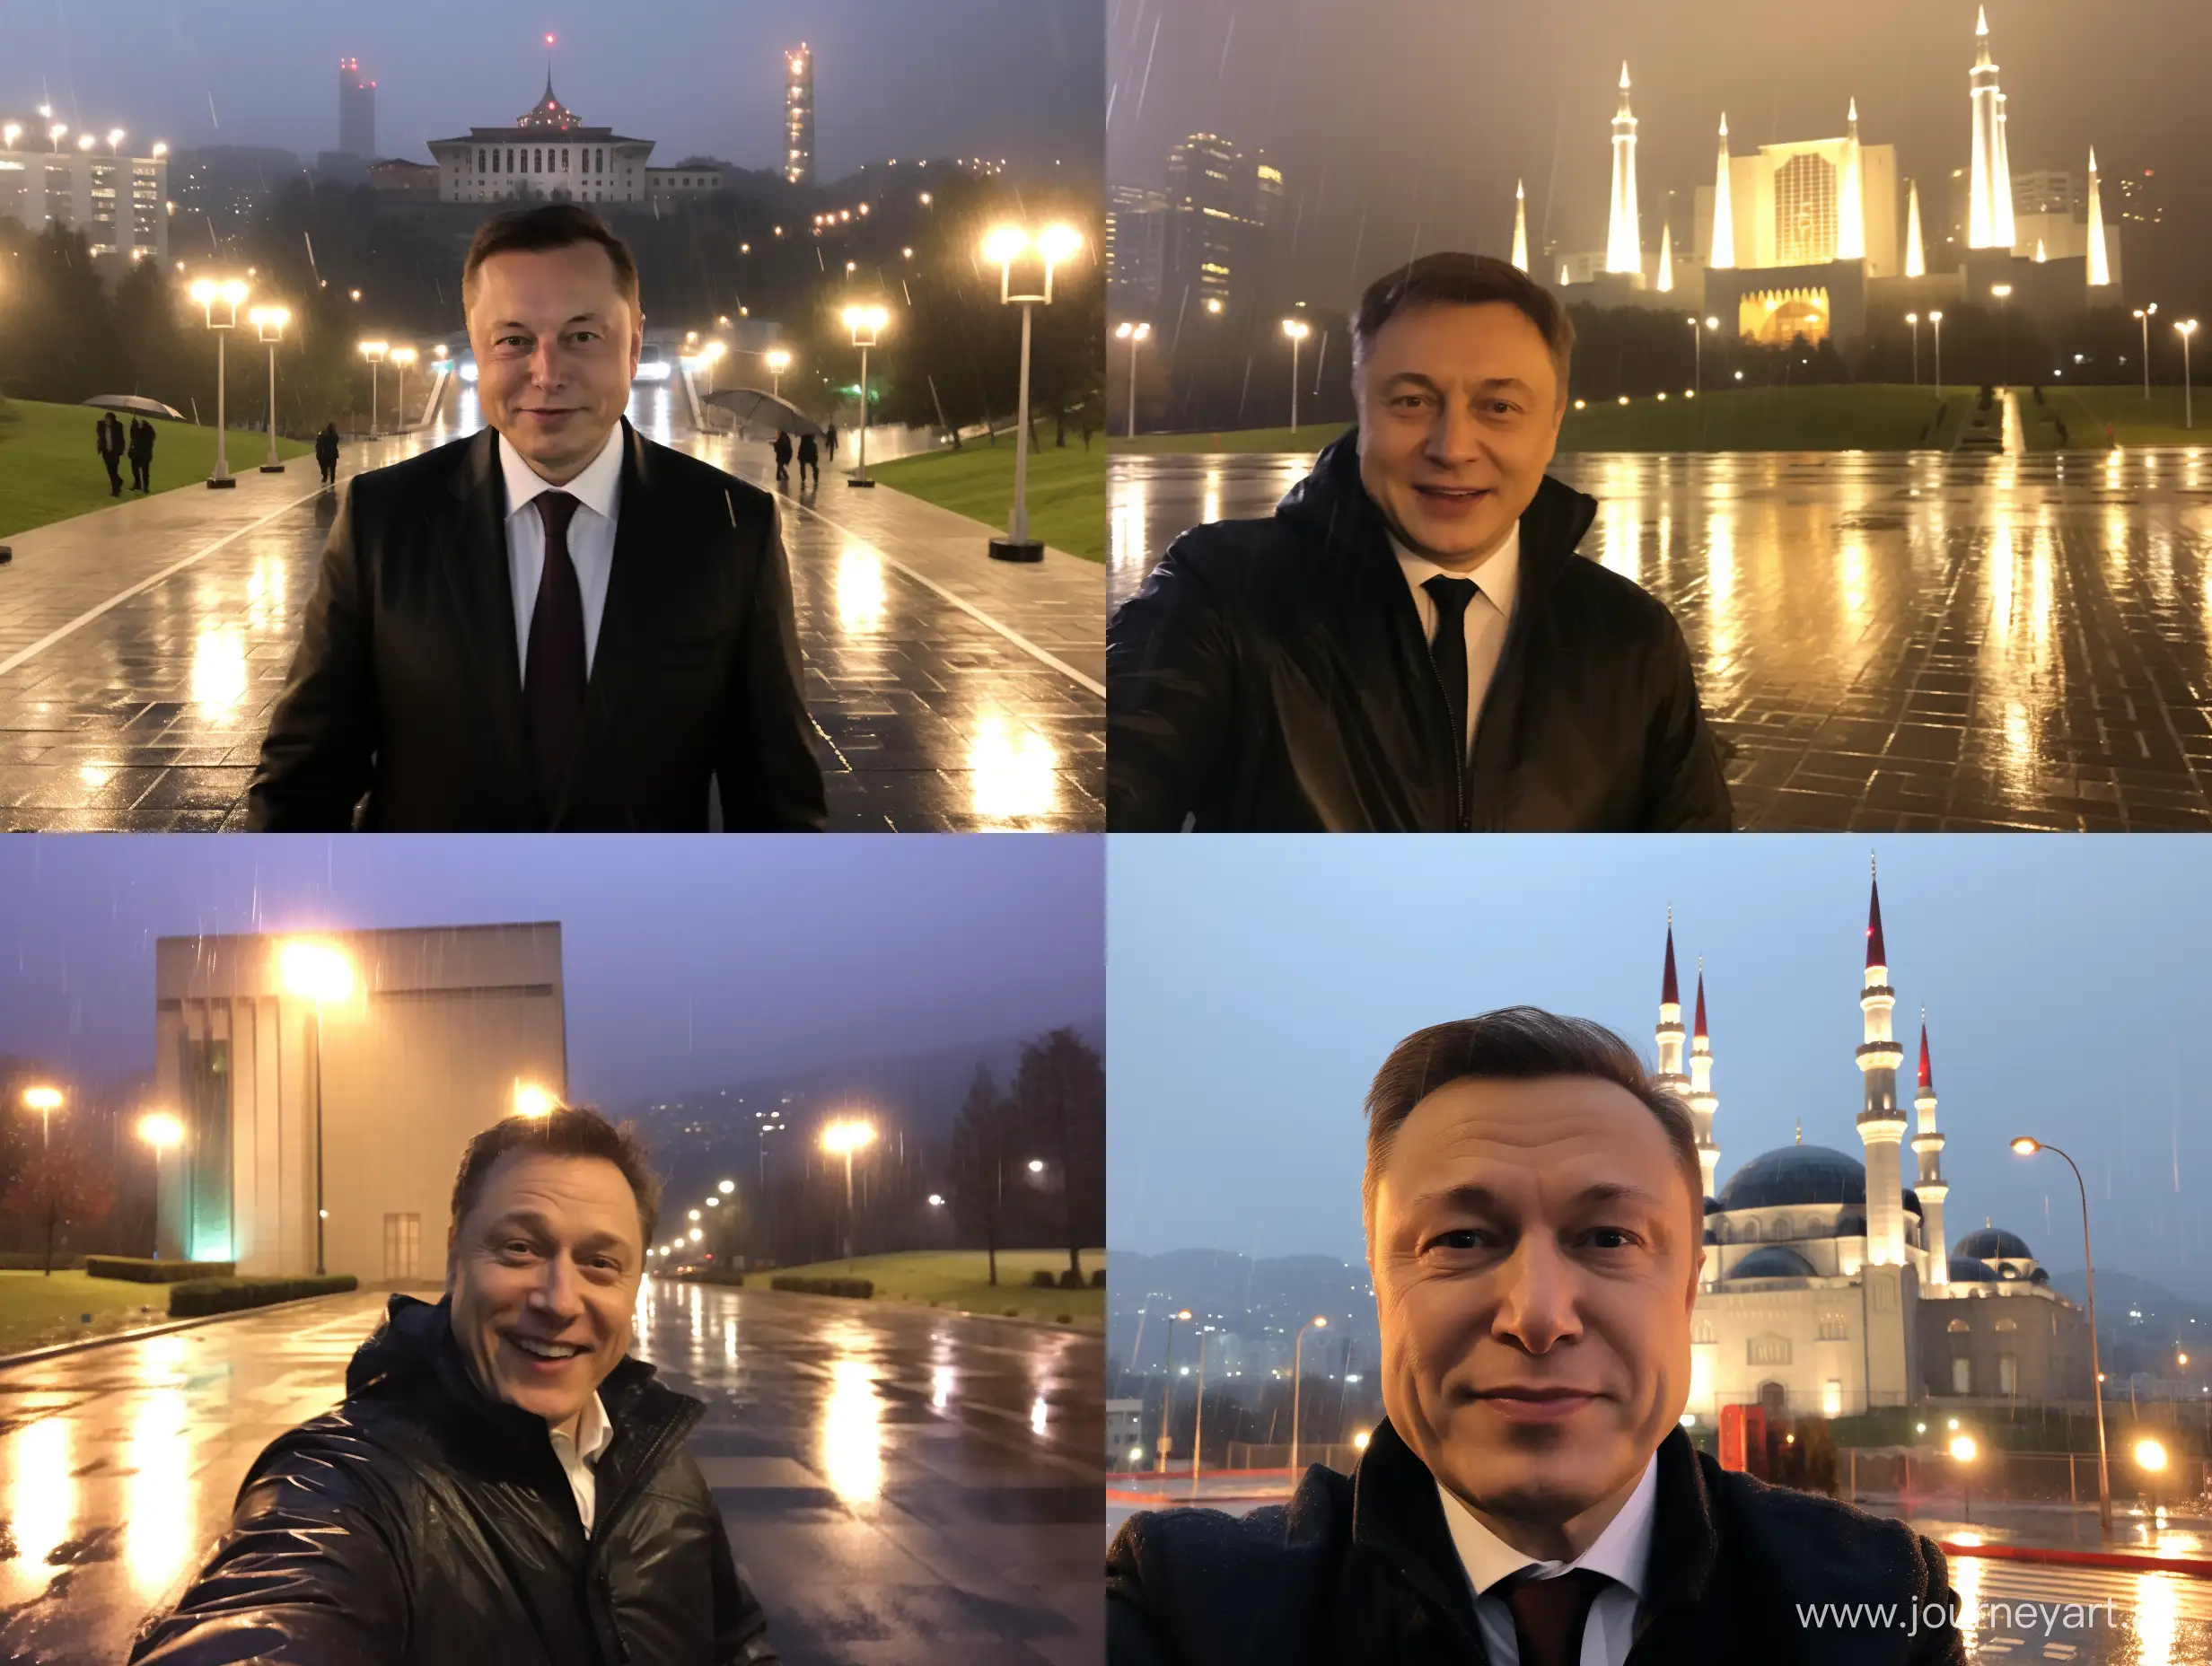 Elon Musk takes a photo in front of Atakule in Ankara on a rainy evening with the lights hitting his face.